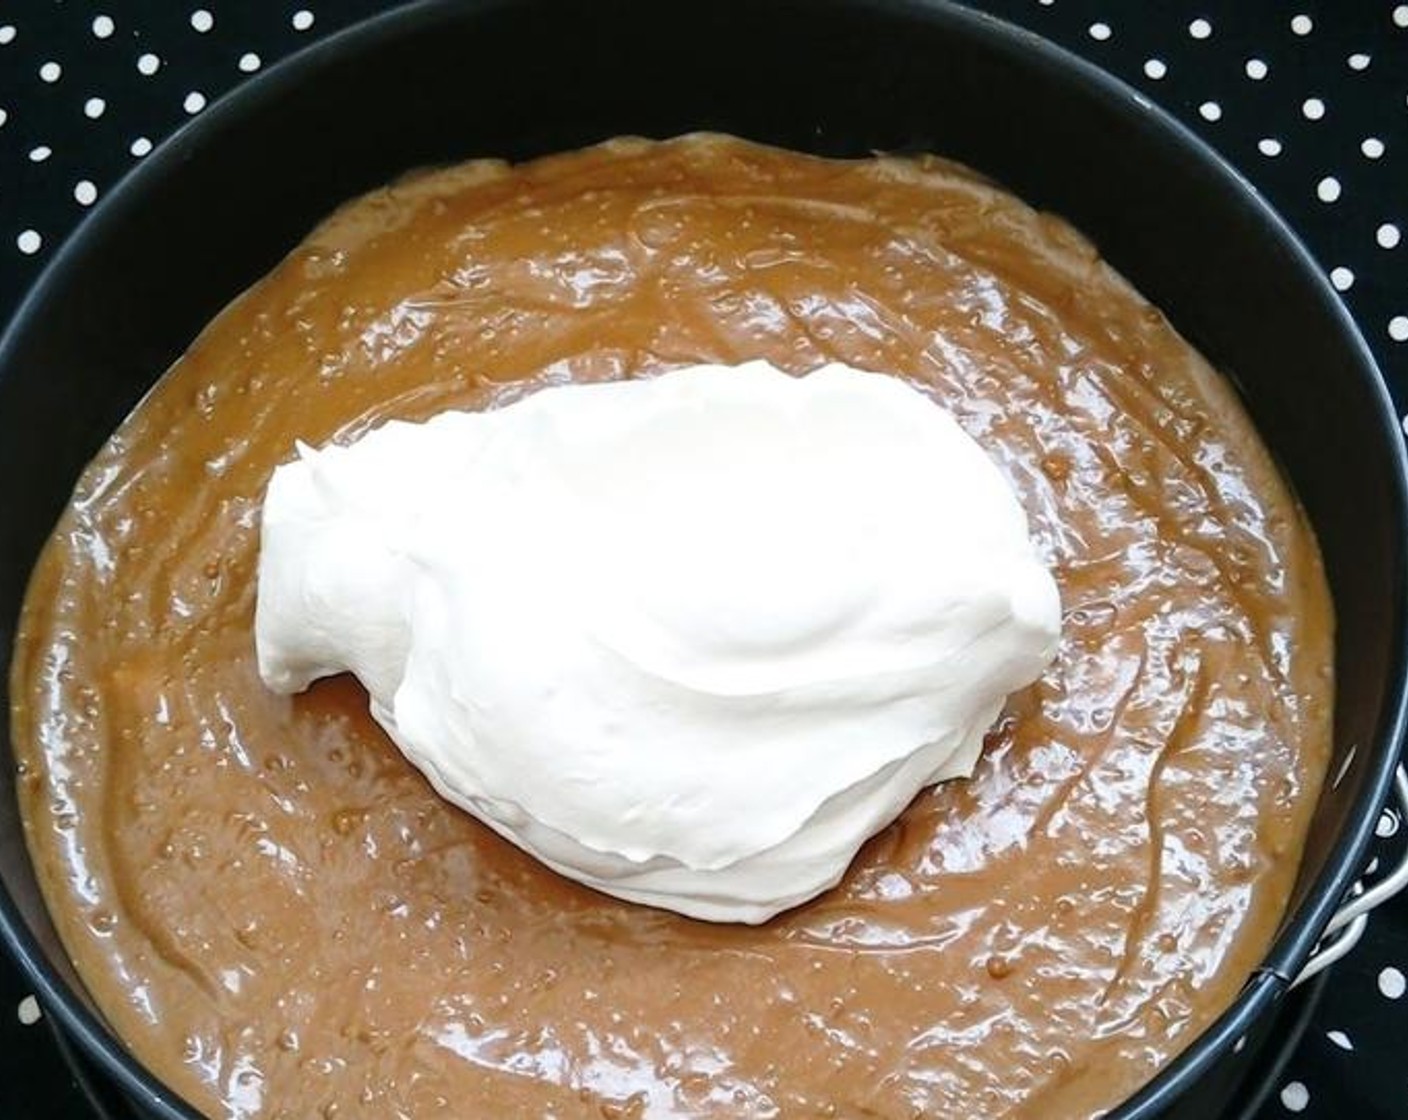 step 6 Place the Whipping Cream (1 cup) in a bowl and add the Caster Sugar (1/2 cup) and Vanilla Essence (1 tsp). Beat until it forms stiff peaks. Pour this whipped cream on top of the toffee layer. Spread well and put in the fridge to chill until ready to serve.